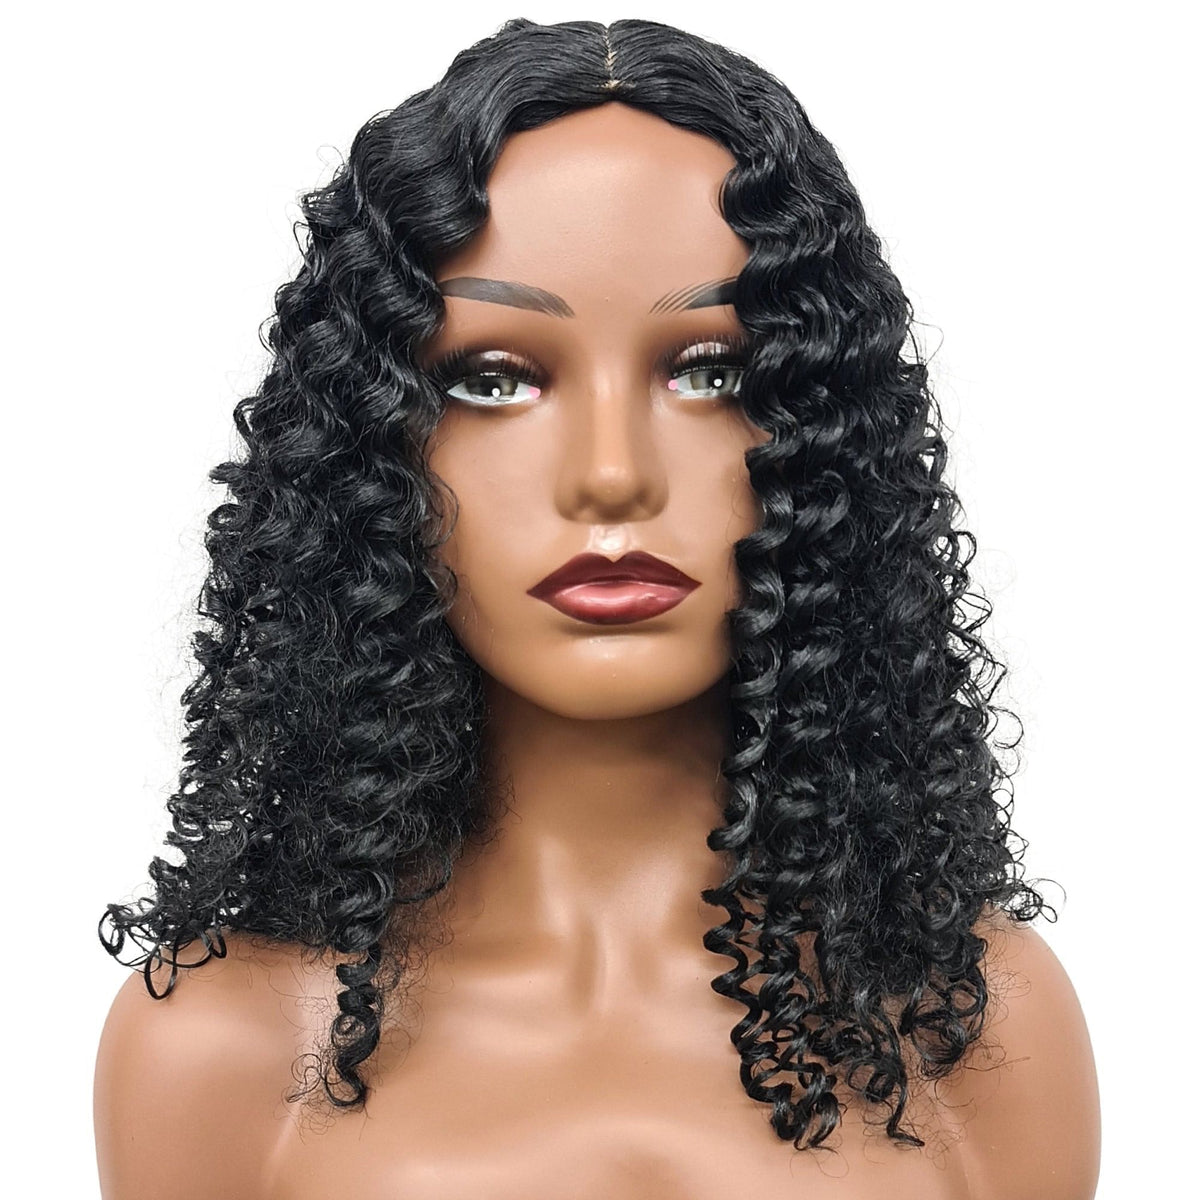 Wig - Black 16 Inch Curly - Wig - Synthetic